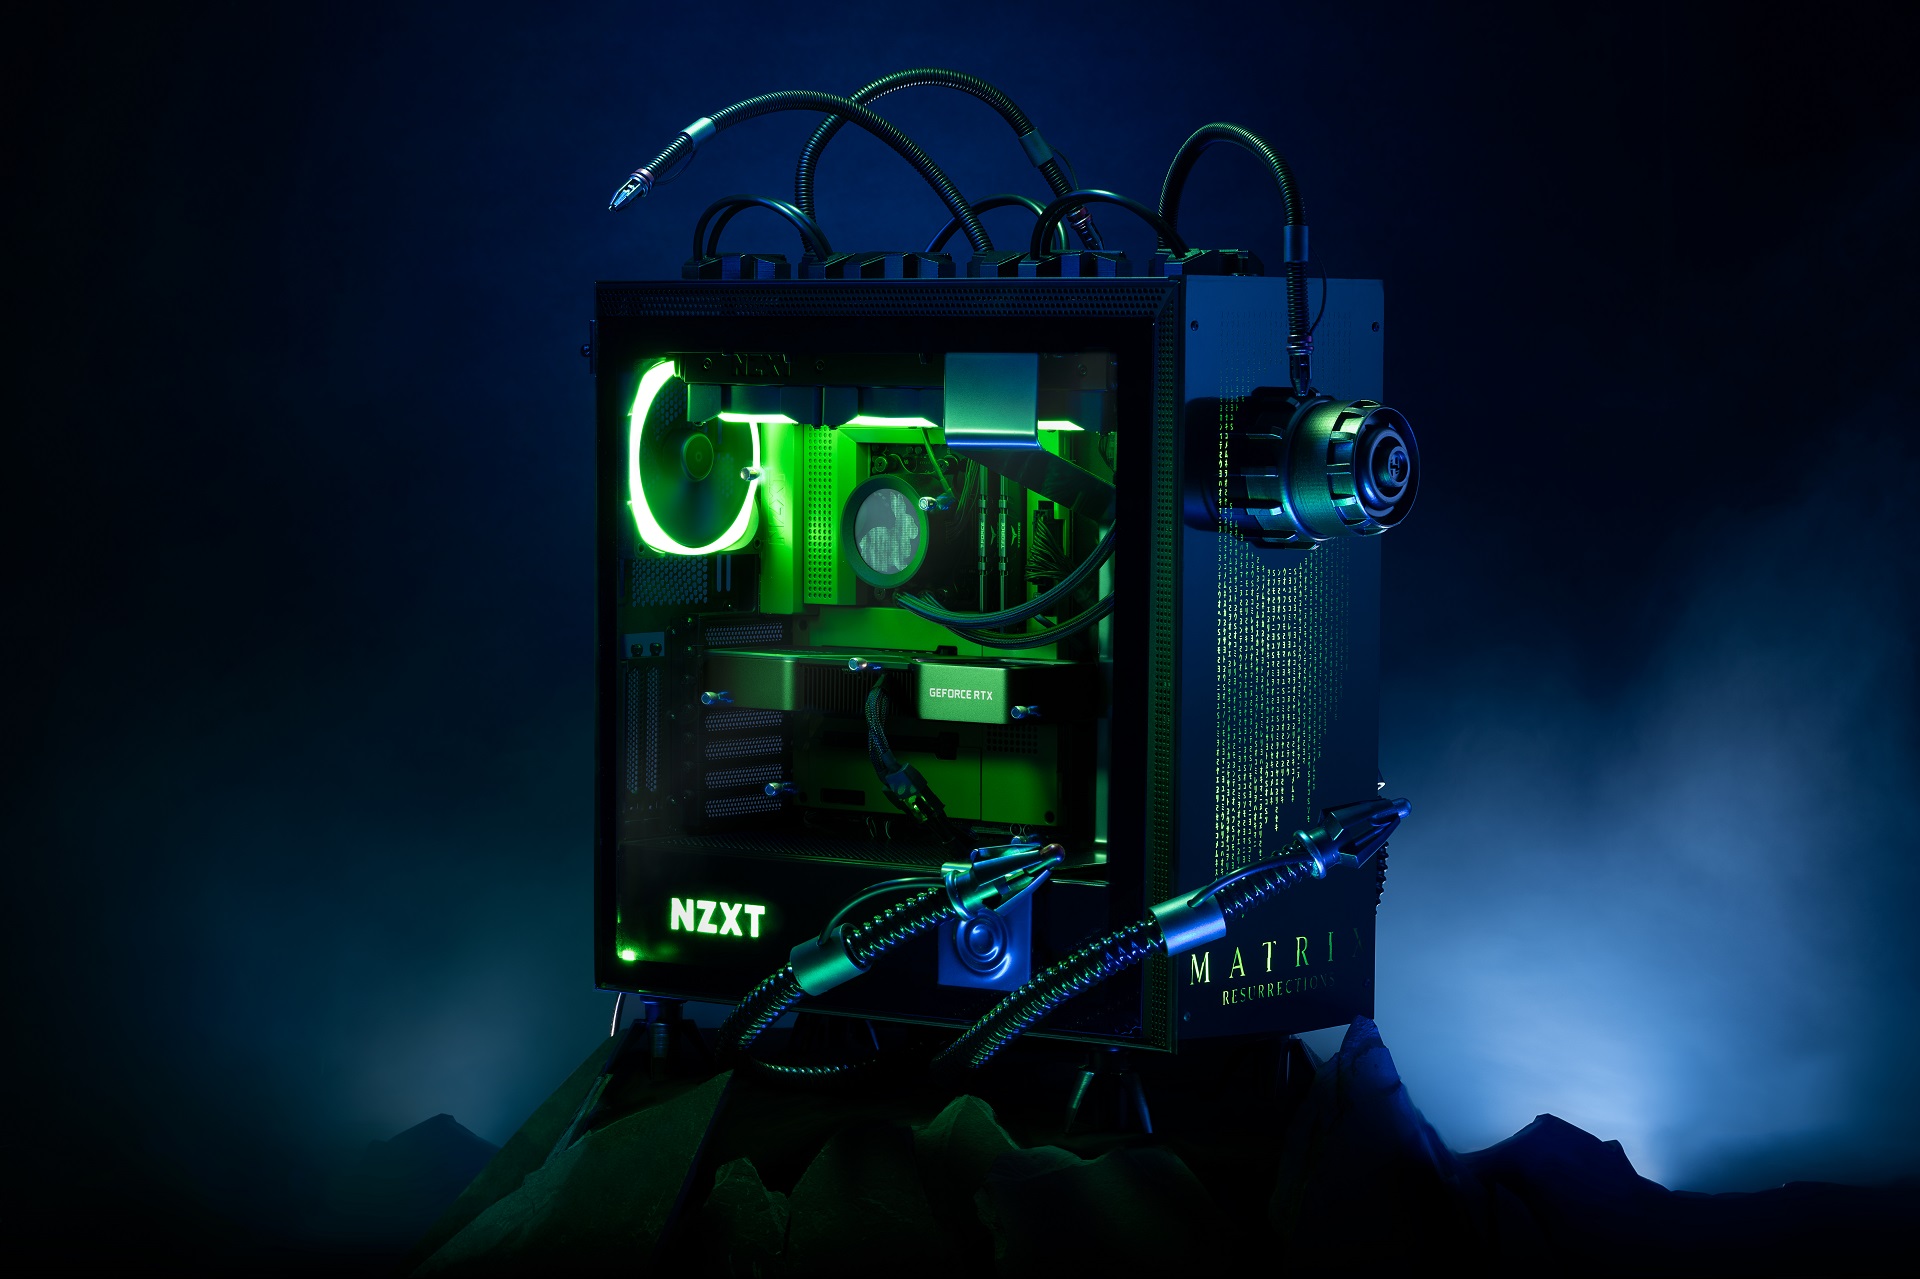 PC build designed after Matrix movie against blue and green backgorund